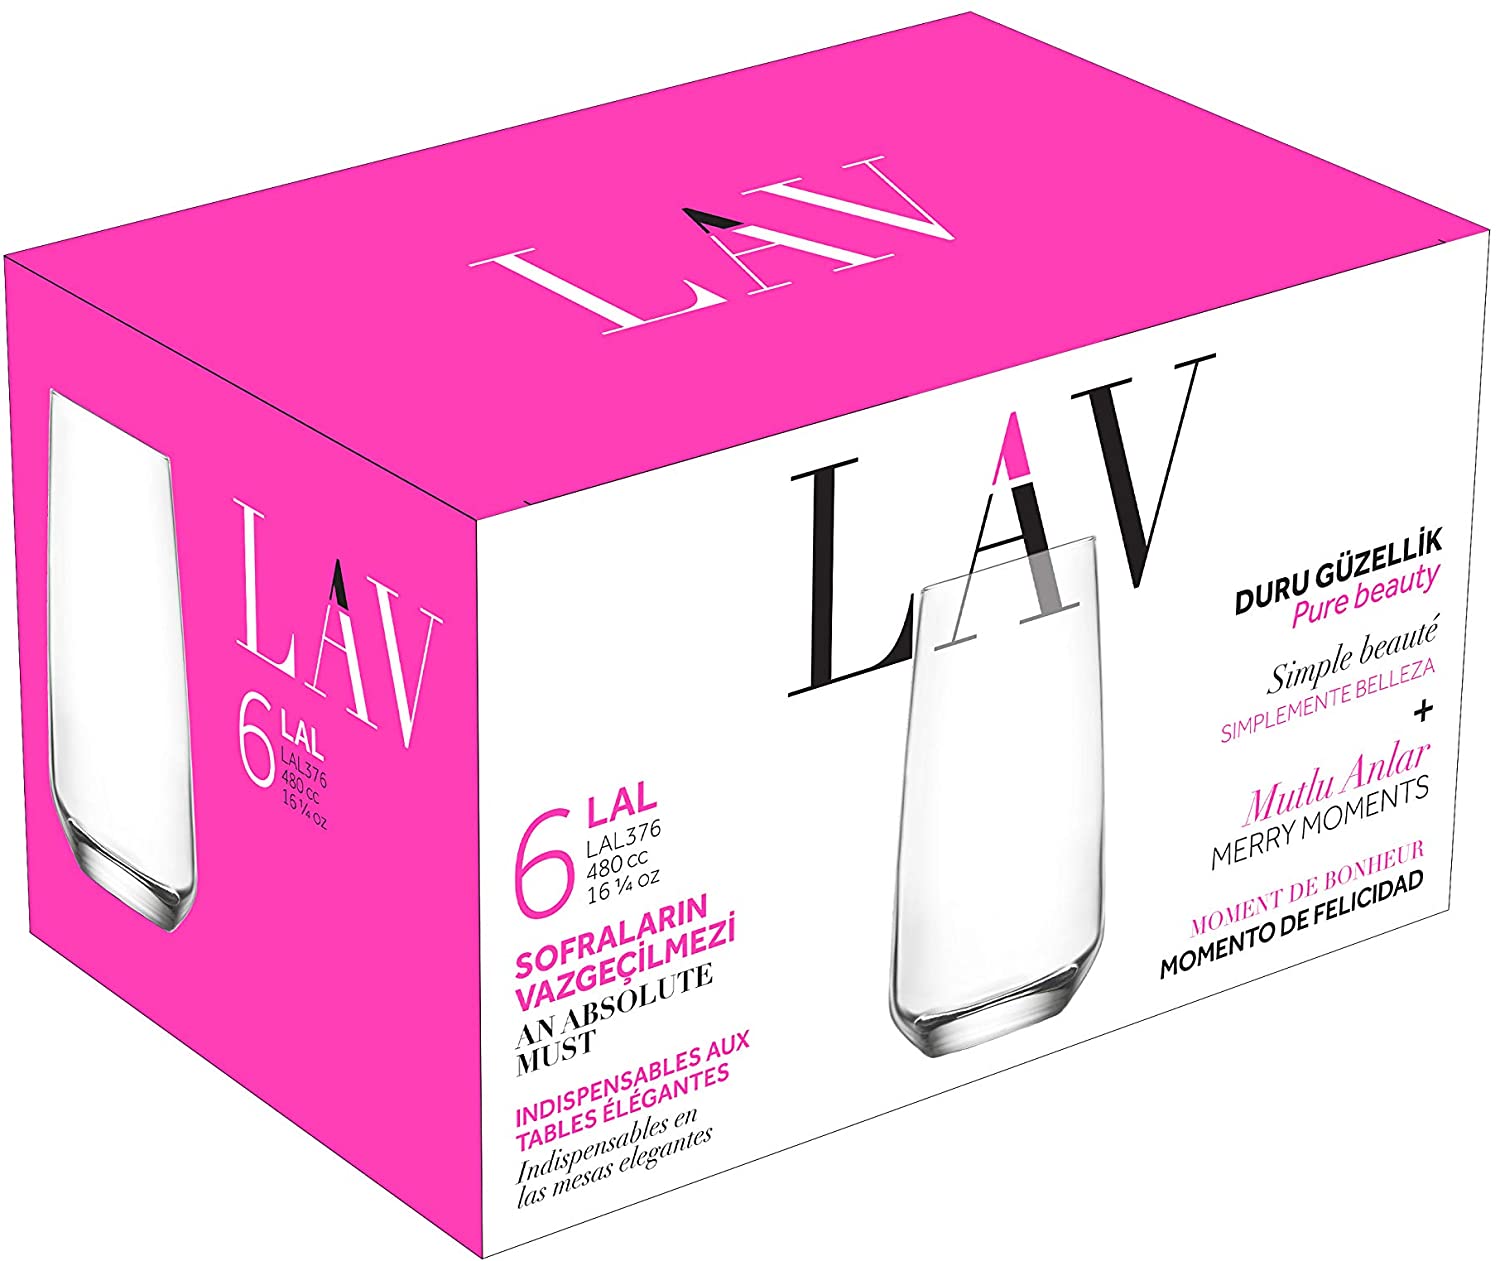 Lav lal lal376 an absolute glass cup for water 6pcs